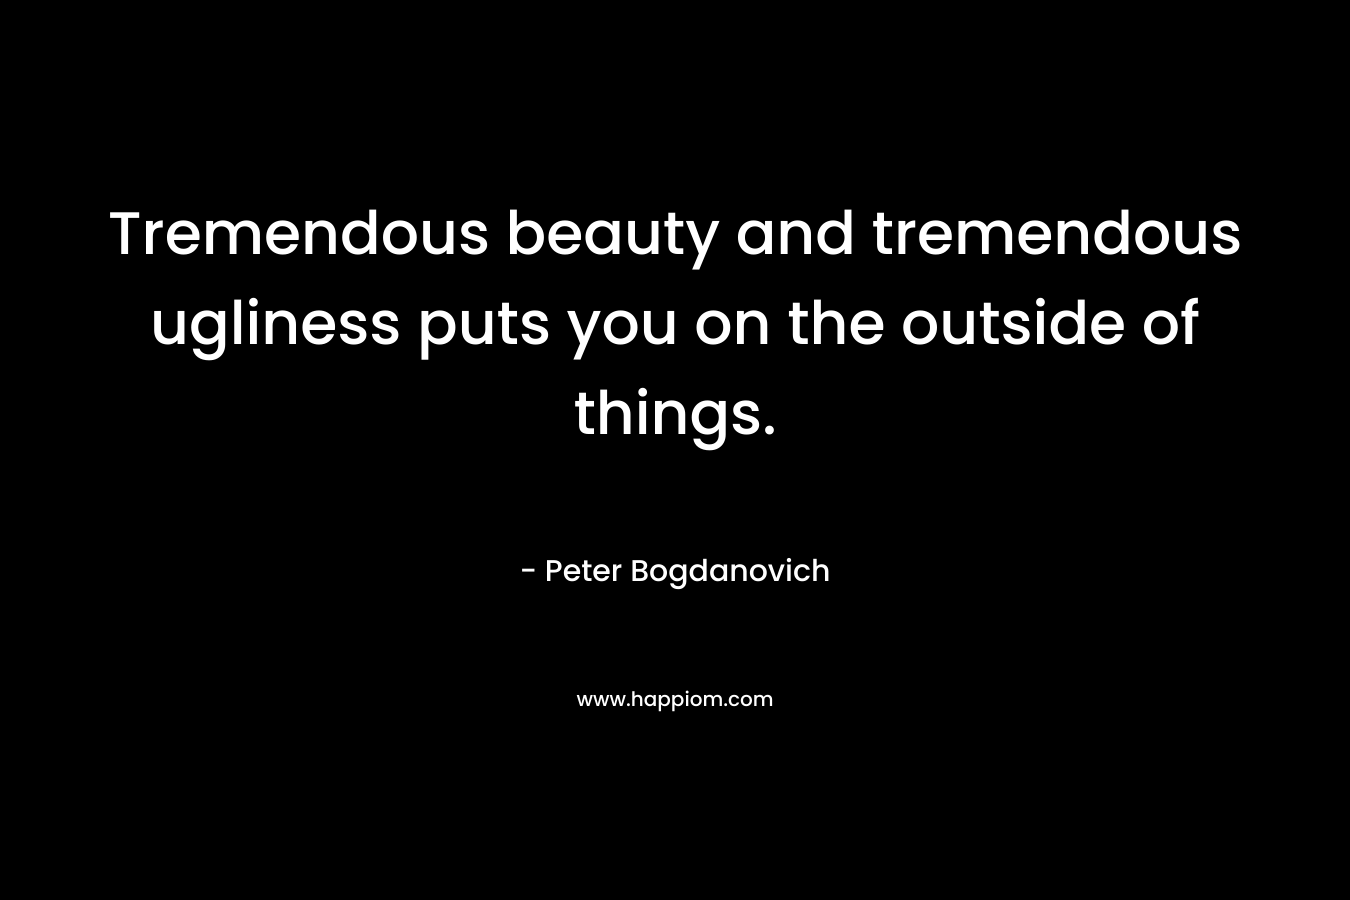 Tremendous beauty and tremendous ugliness puts you on the outside of things.